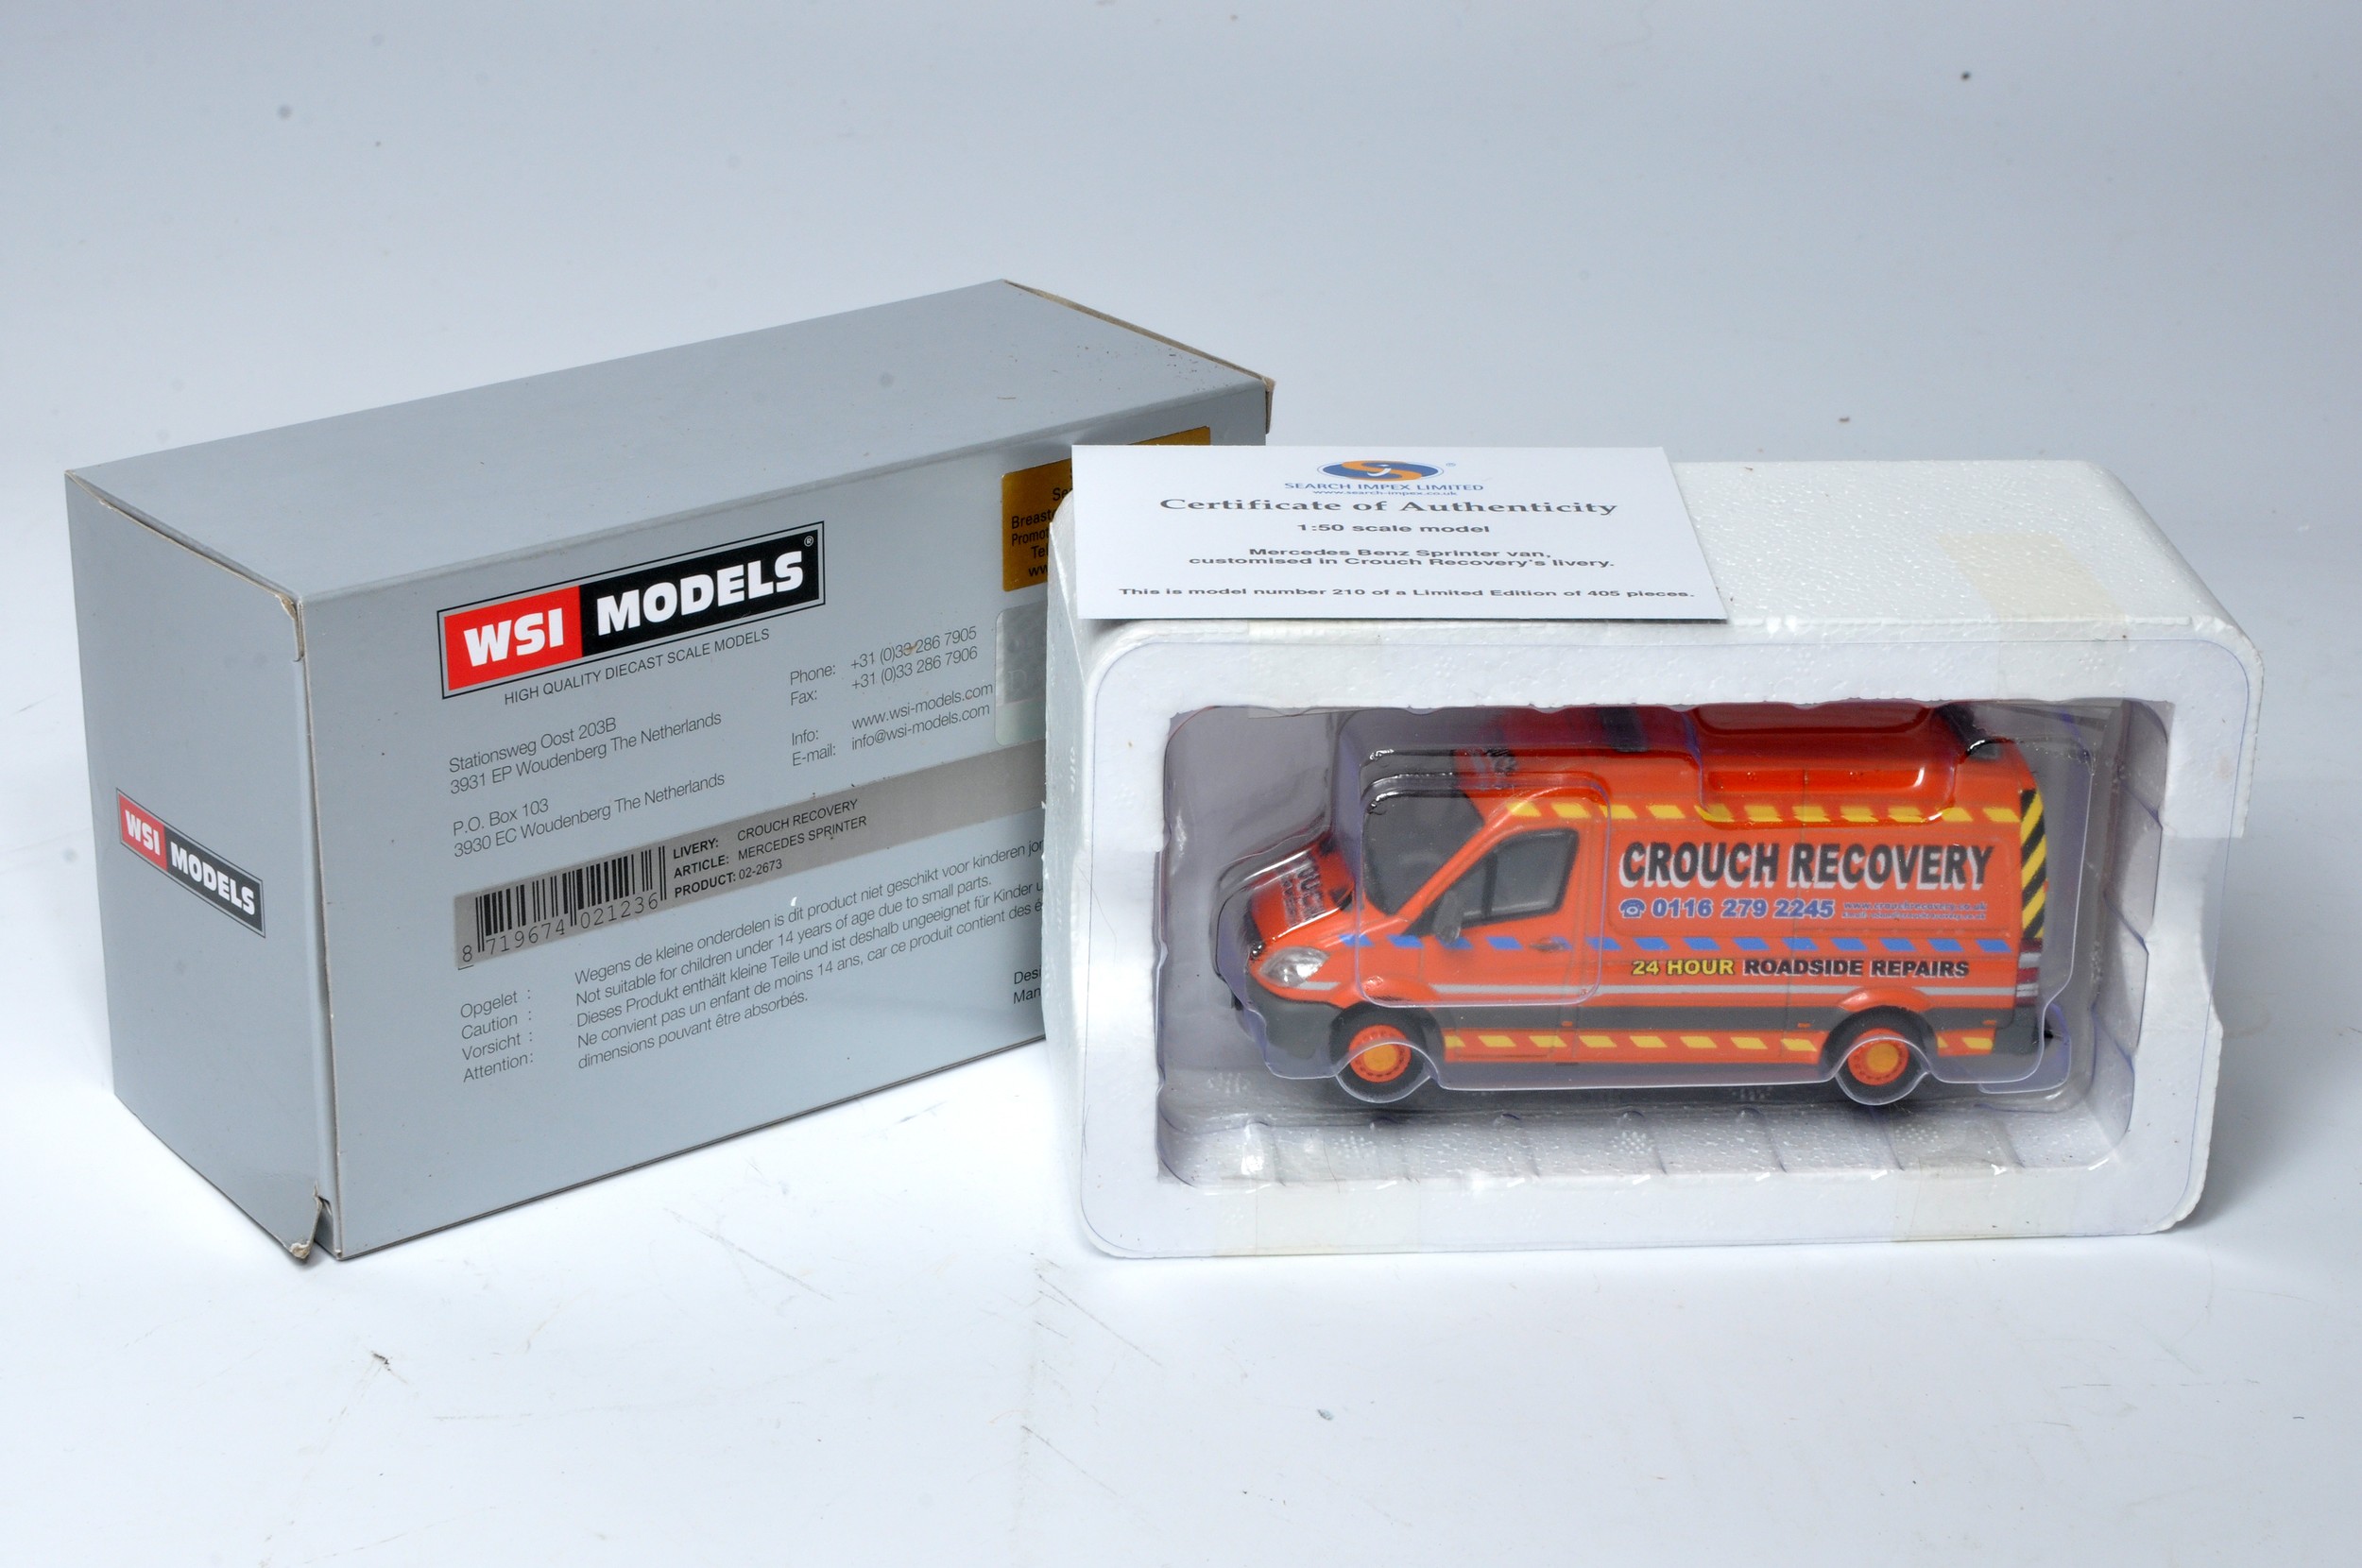 WSI 1/50 diecast model truck issue comprising Mercedes Sprinter Van in the livery of Crouch